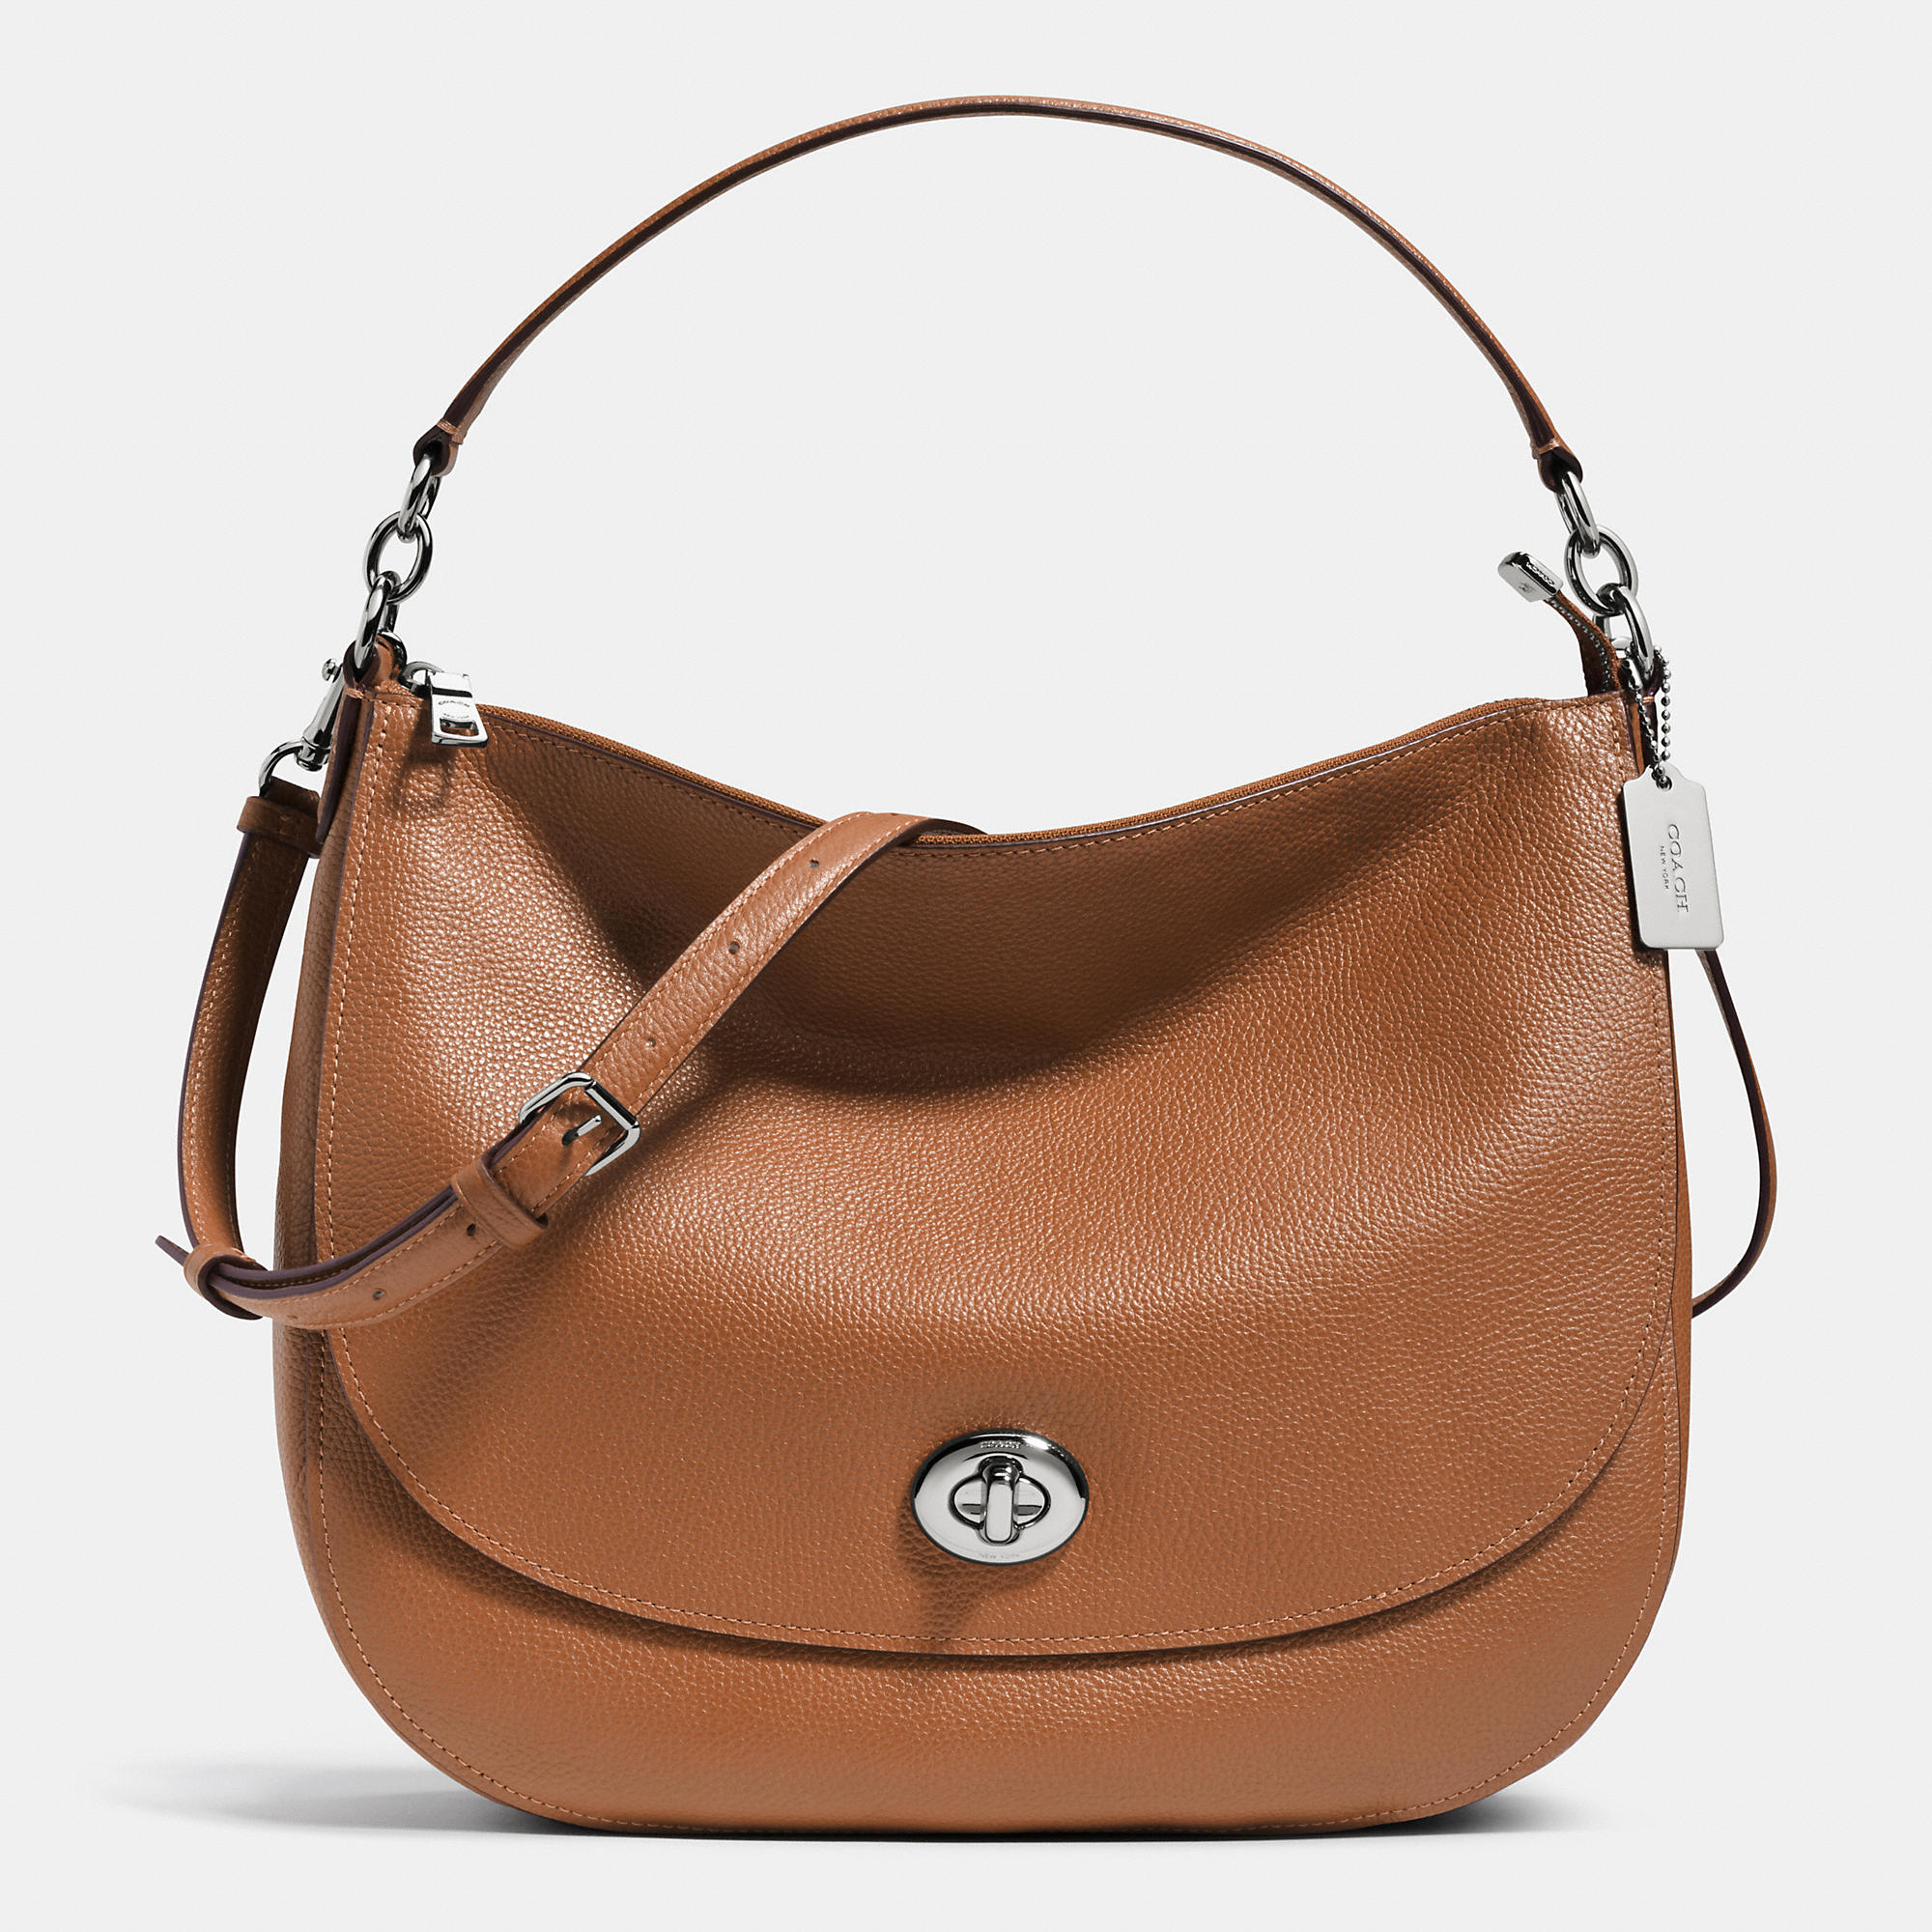 New Realer Coach Turnlock Hobo In Pebble Leather